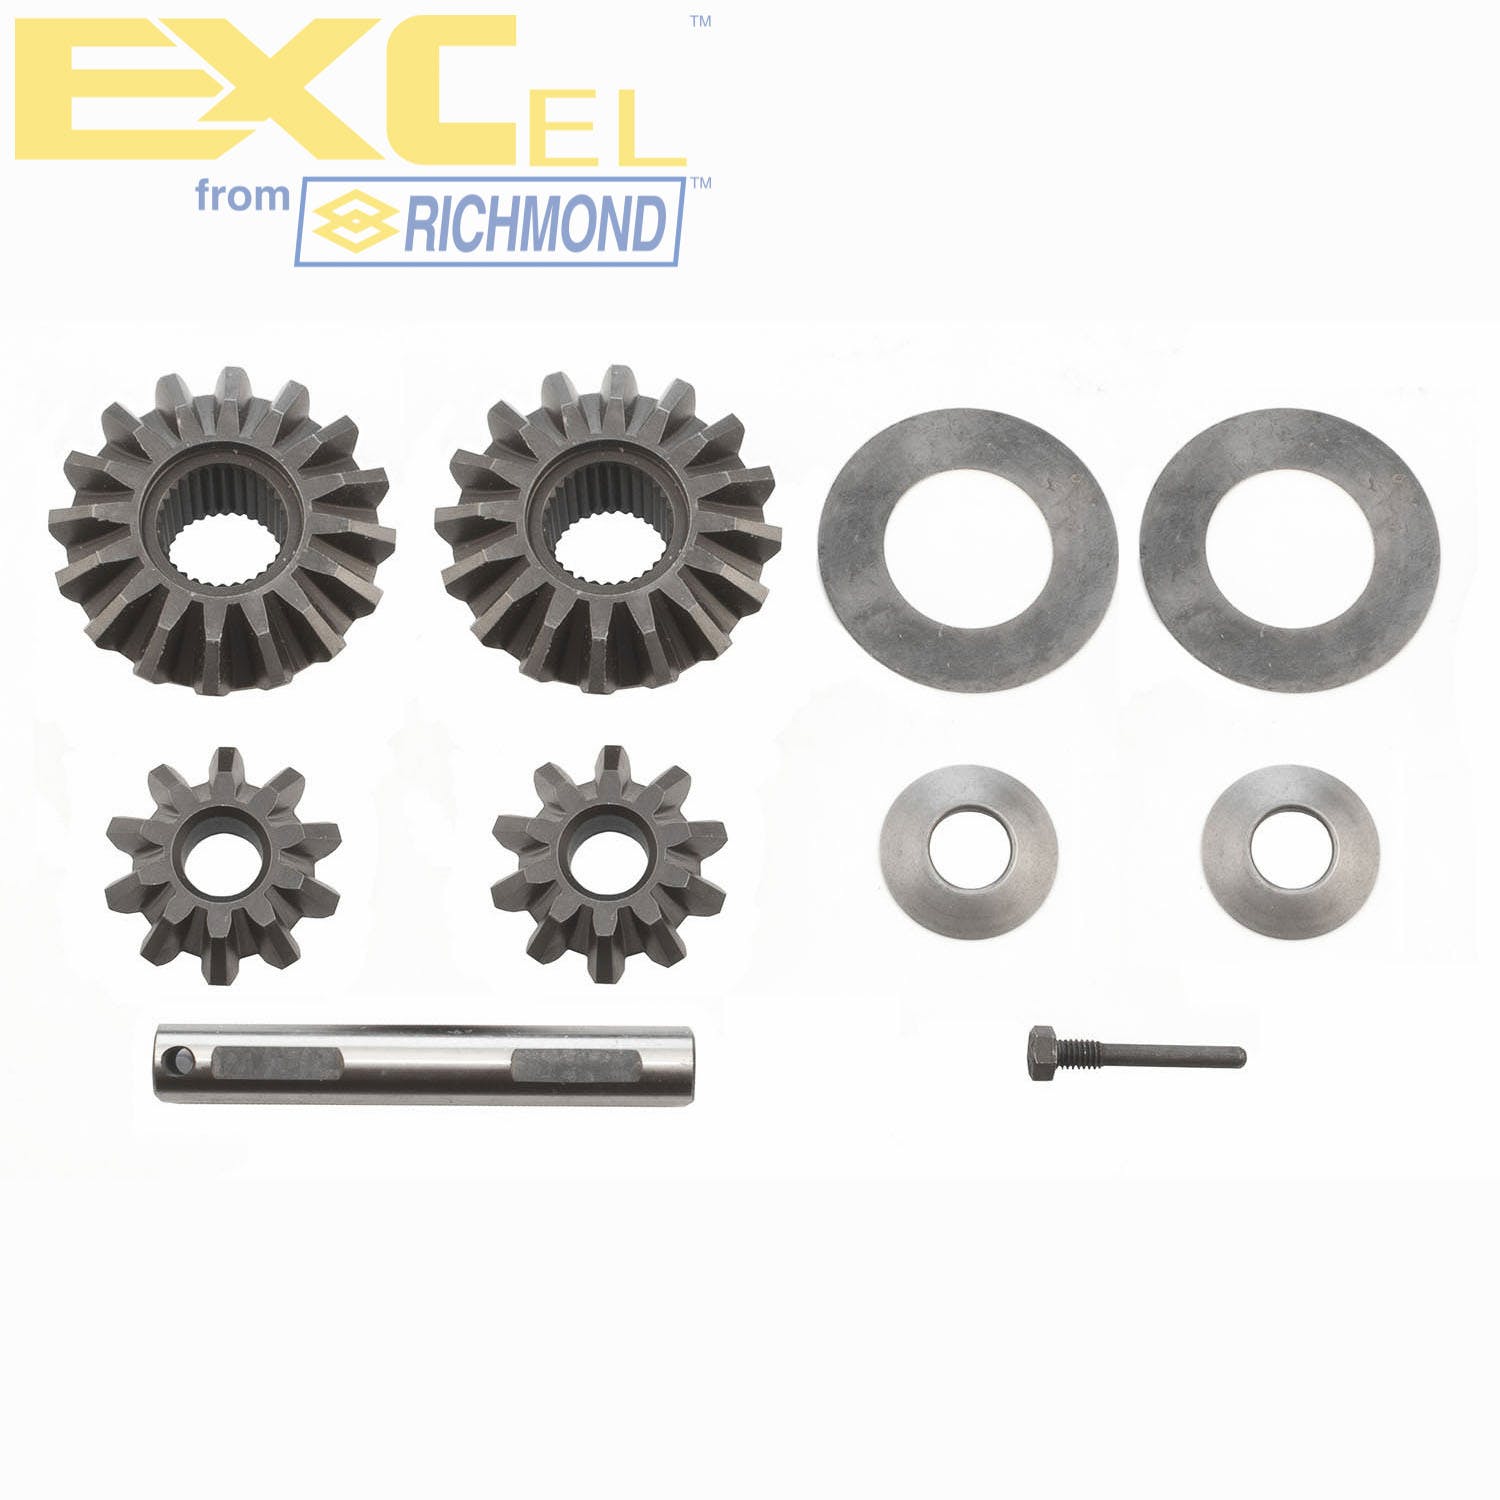 Excel XL-4058 Differential Carrier Gear Kit